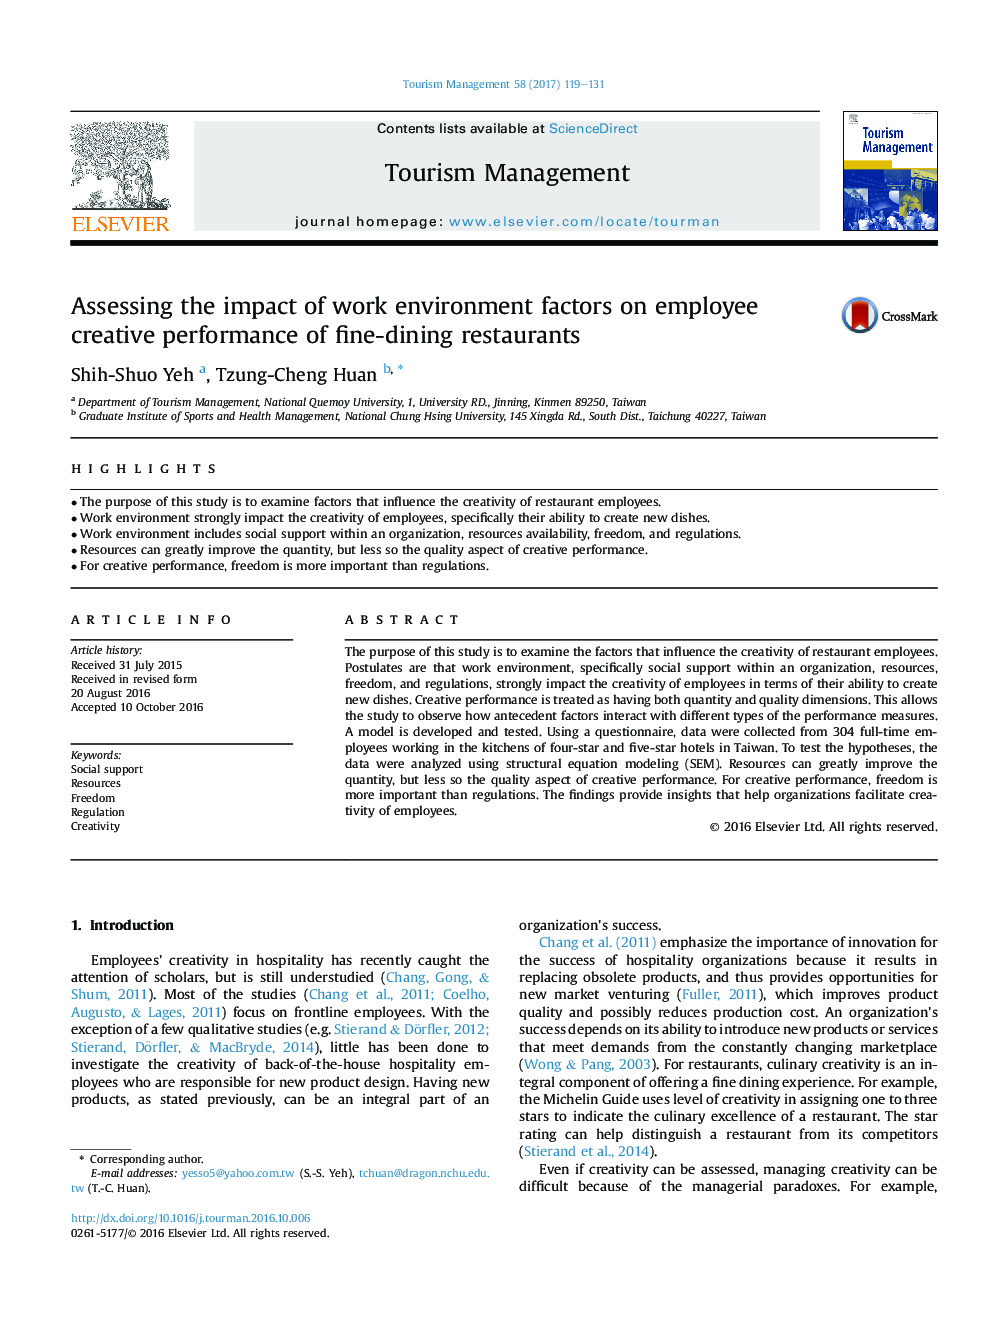 Assessing the impact of work environment factors on employee creative performance of fine-dining restaurants